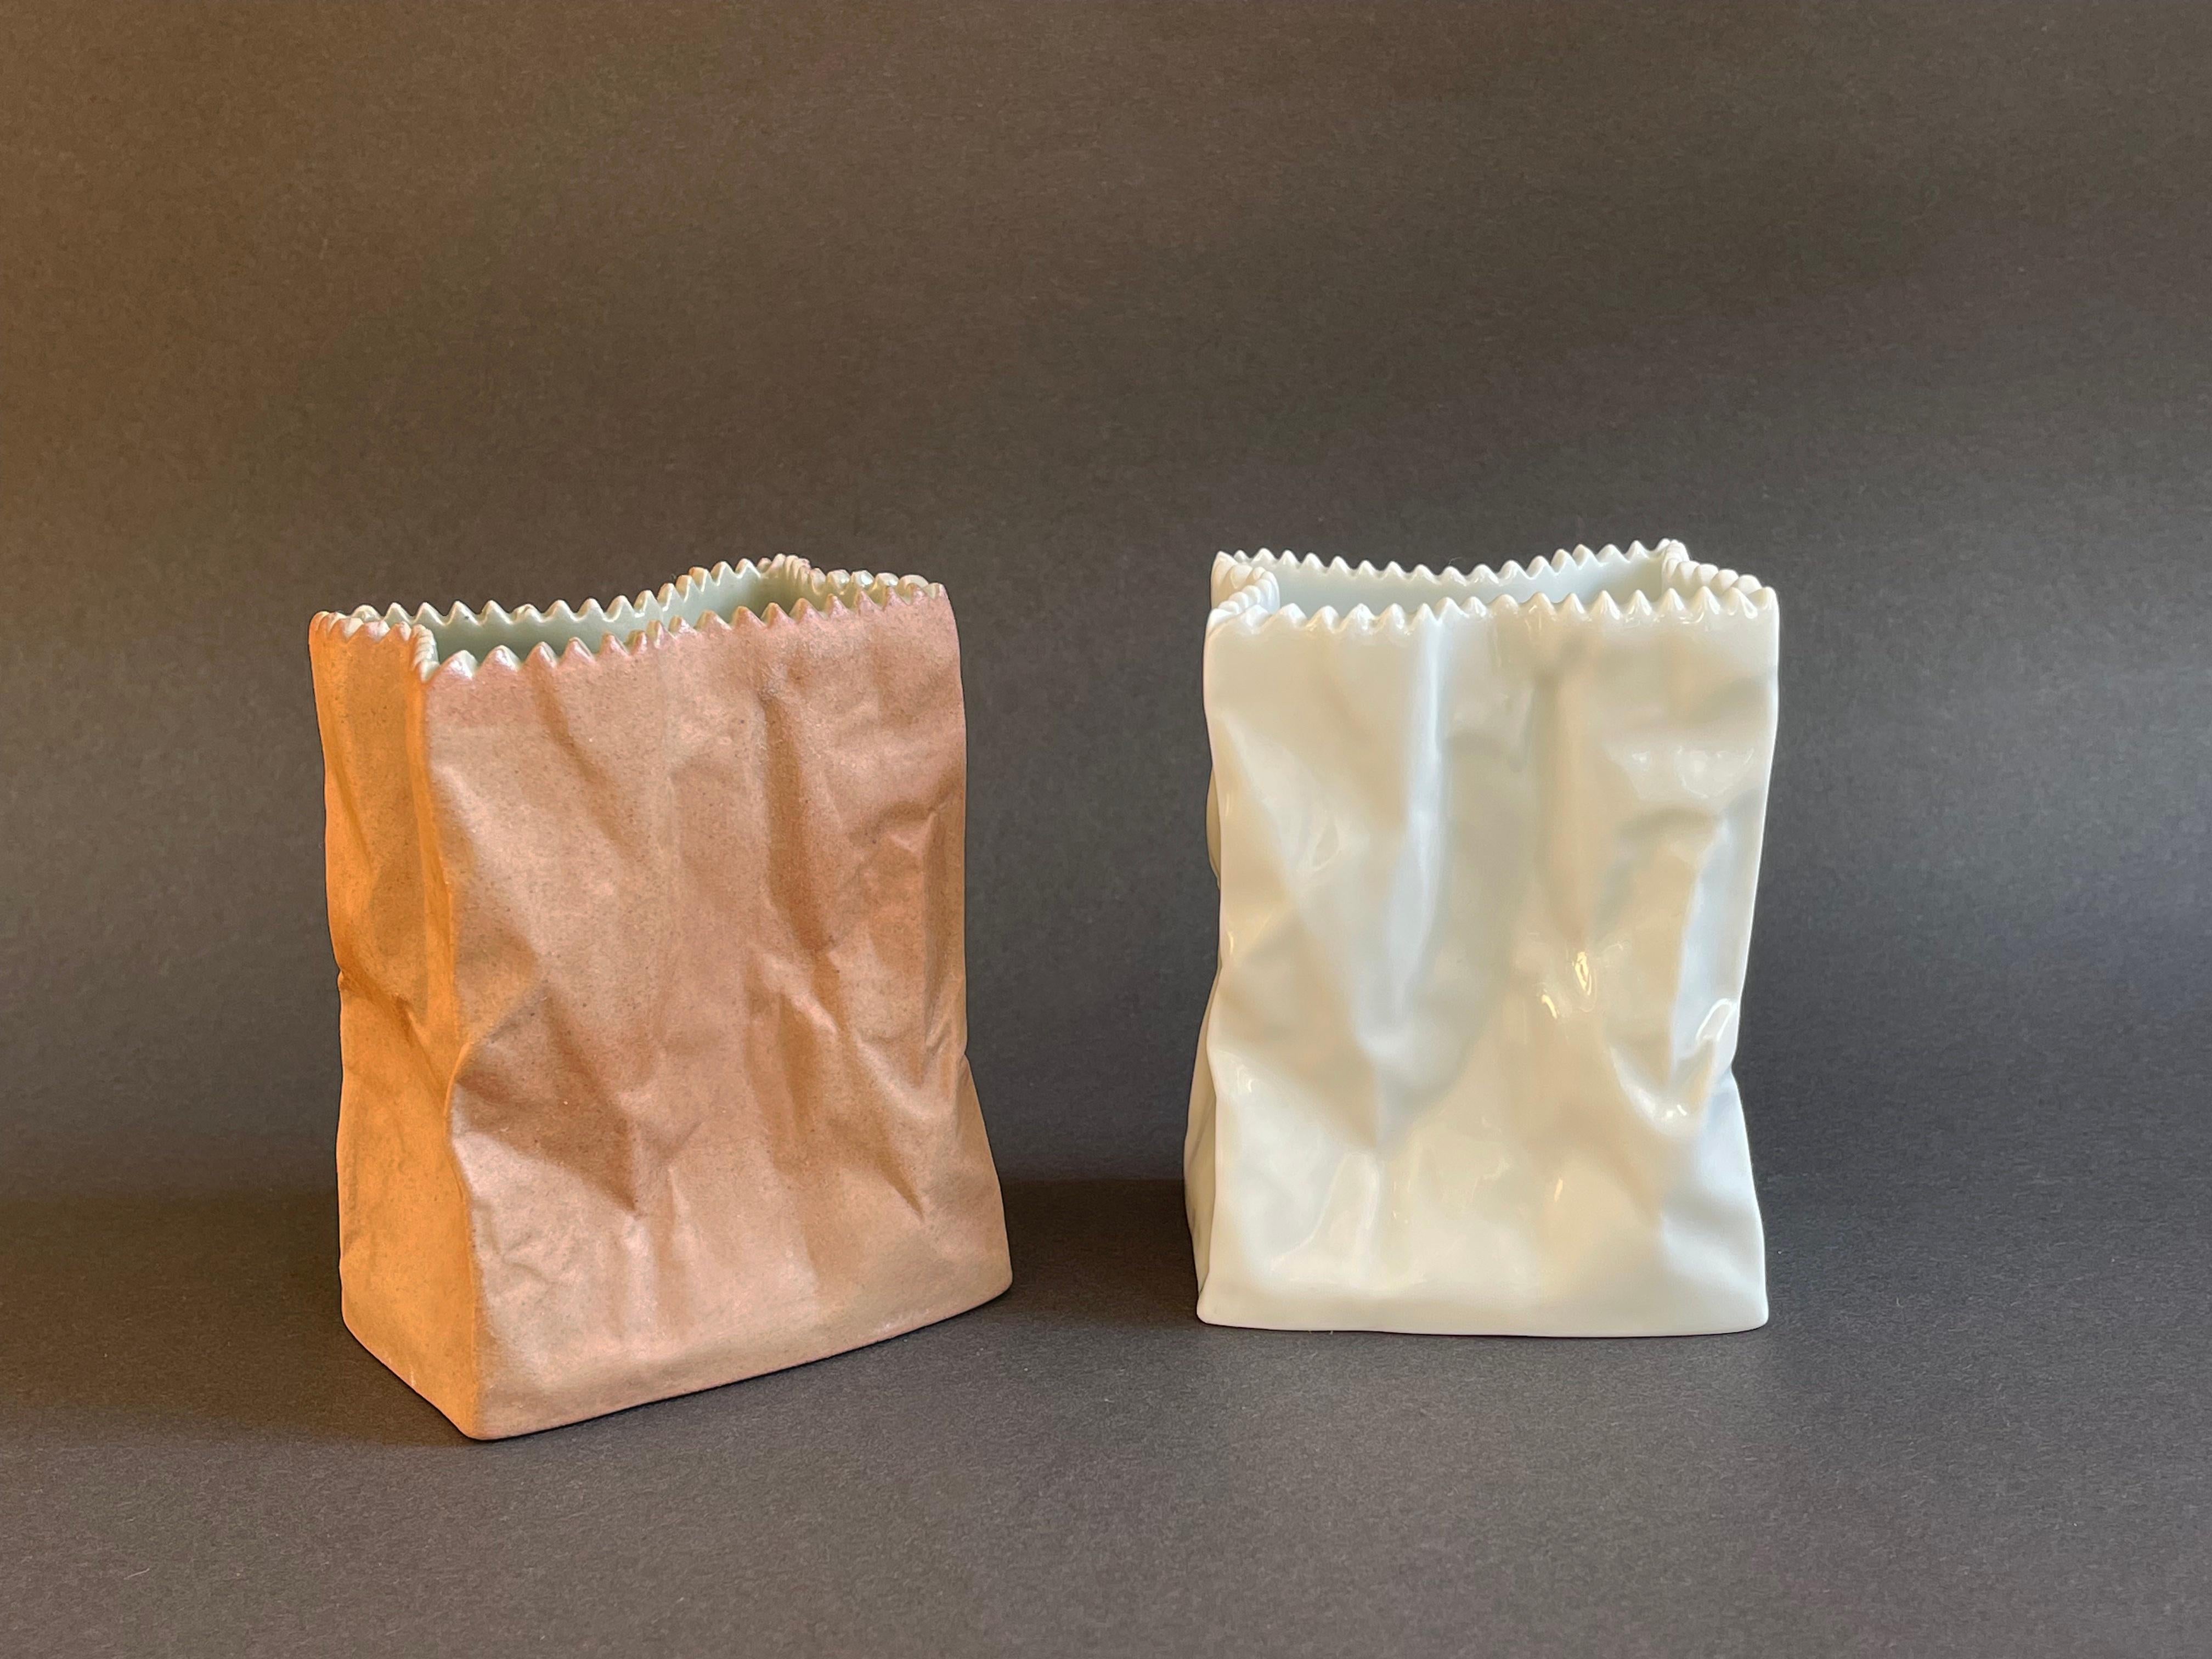 Design vintage classic by Tapio for the ''Studio-Line'' Rosenthal, Germany.
Set of 2 so called ''Paper Bag'' vases, the brown one an original of the time, 1977 approx..
It comes with a roughly textured pale darkish brown paper bag finish and a grey